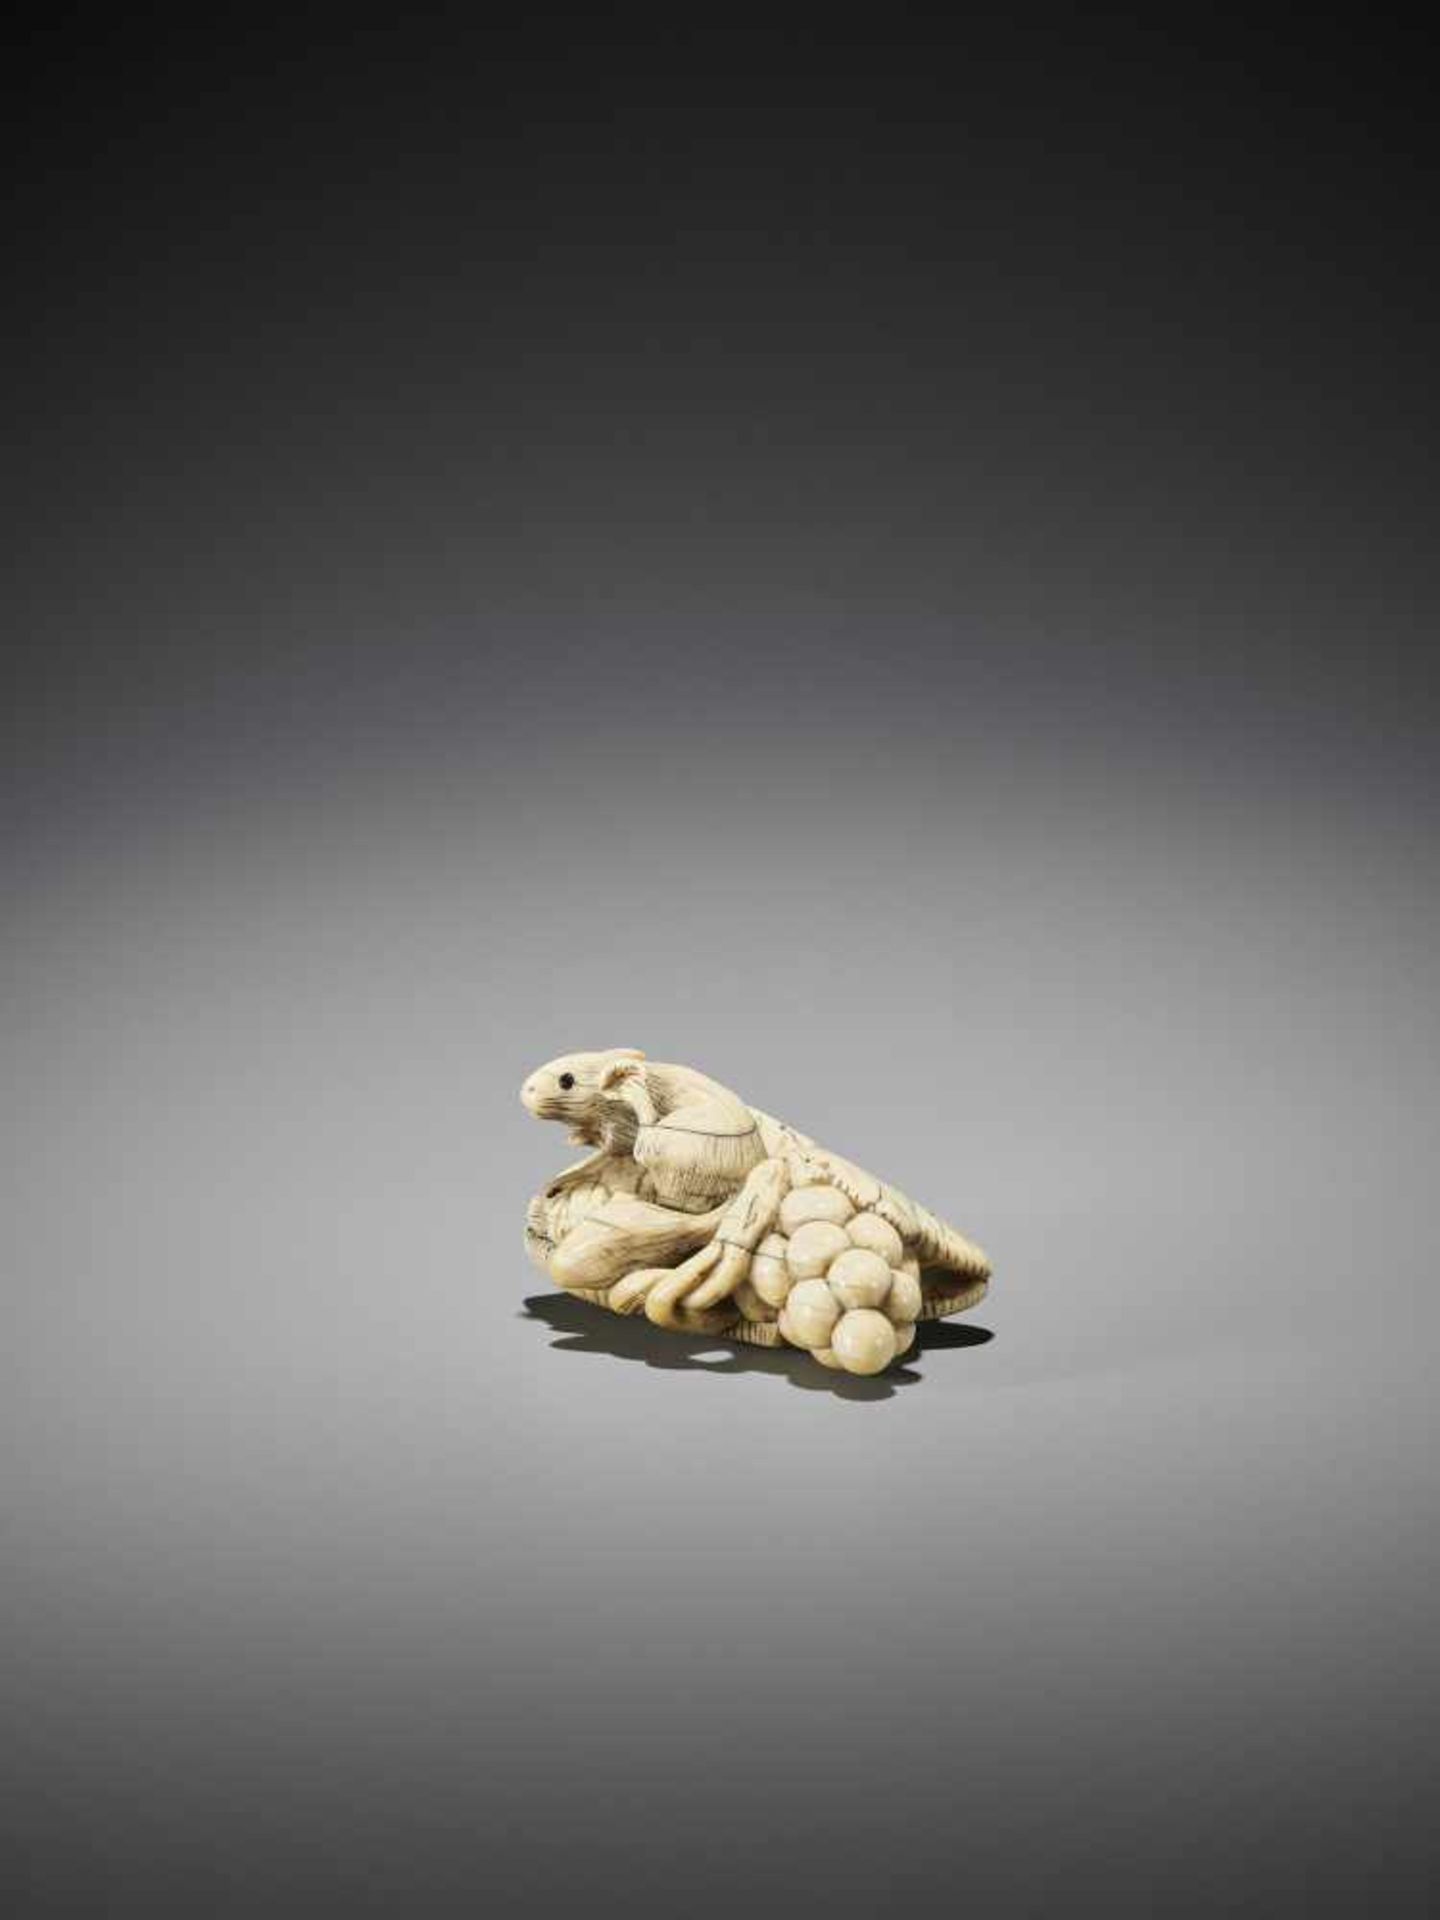 AN IVORY NETSUKE OF A SQUIRELL AND GRAPES - Image 5 of 10